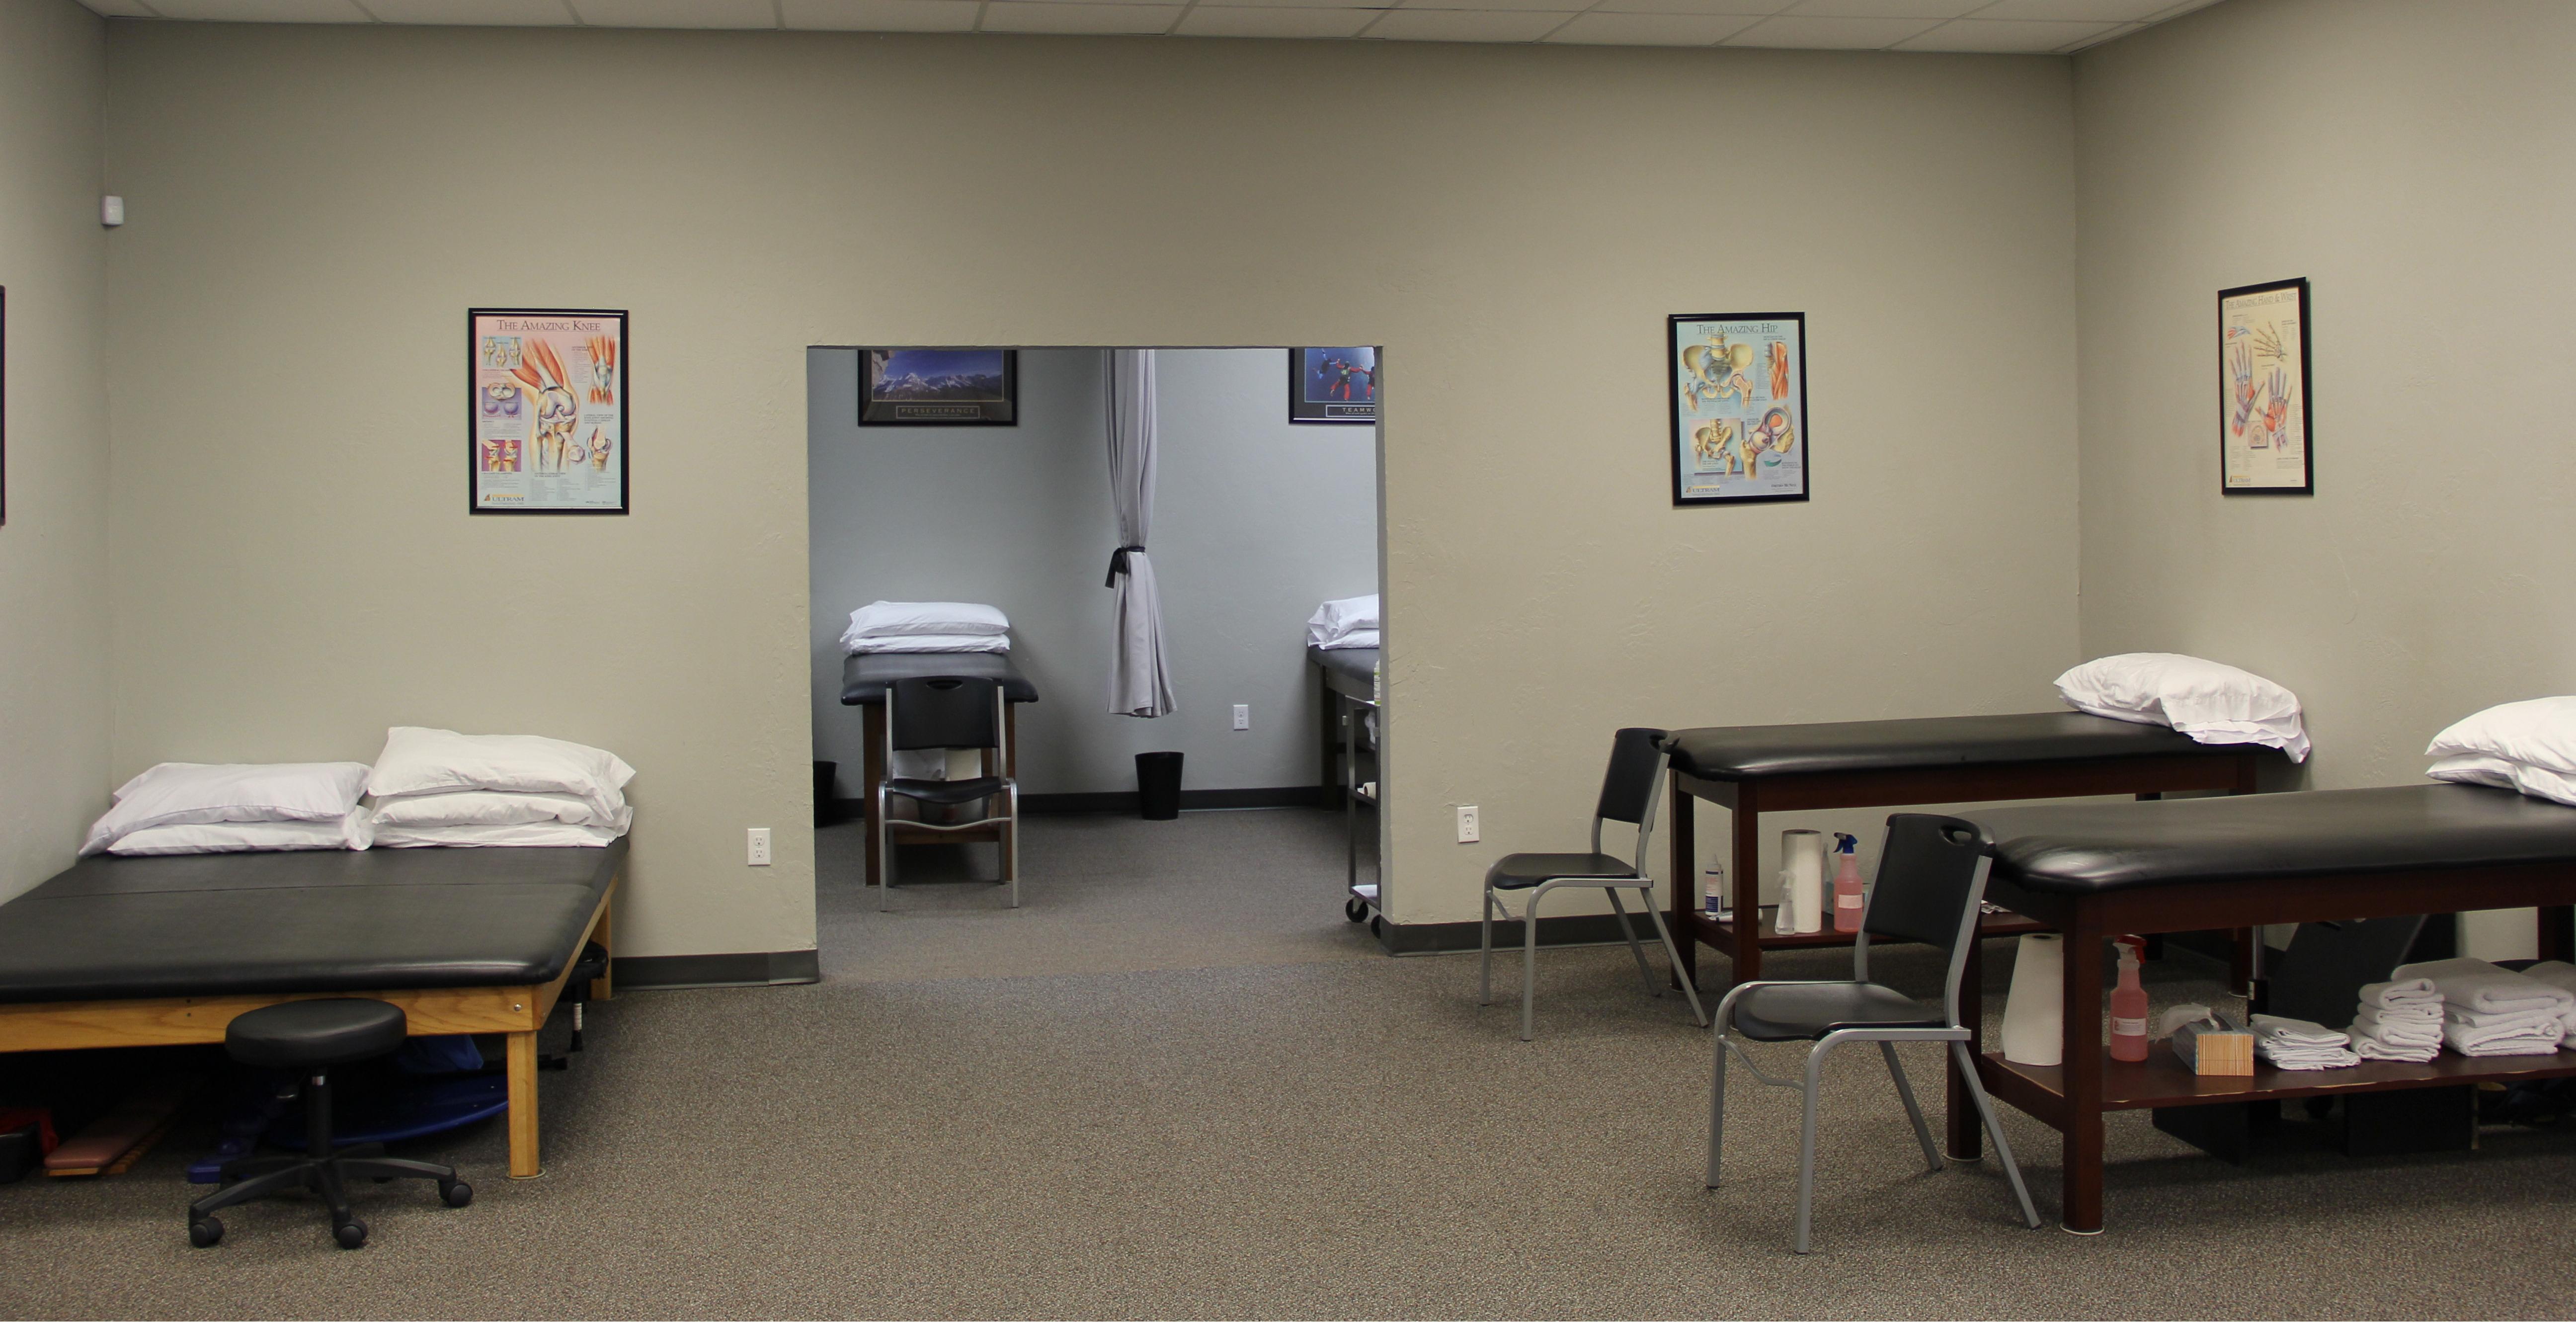 Therapy In Motion, Moore Oklahoma Ok - Localdatabasecom-2128